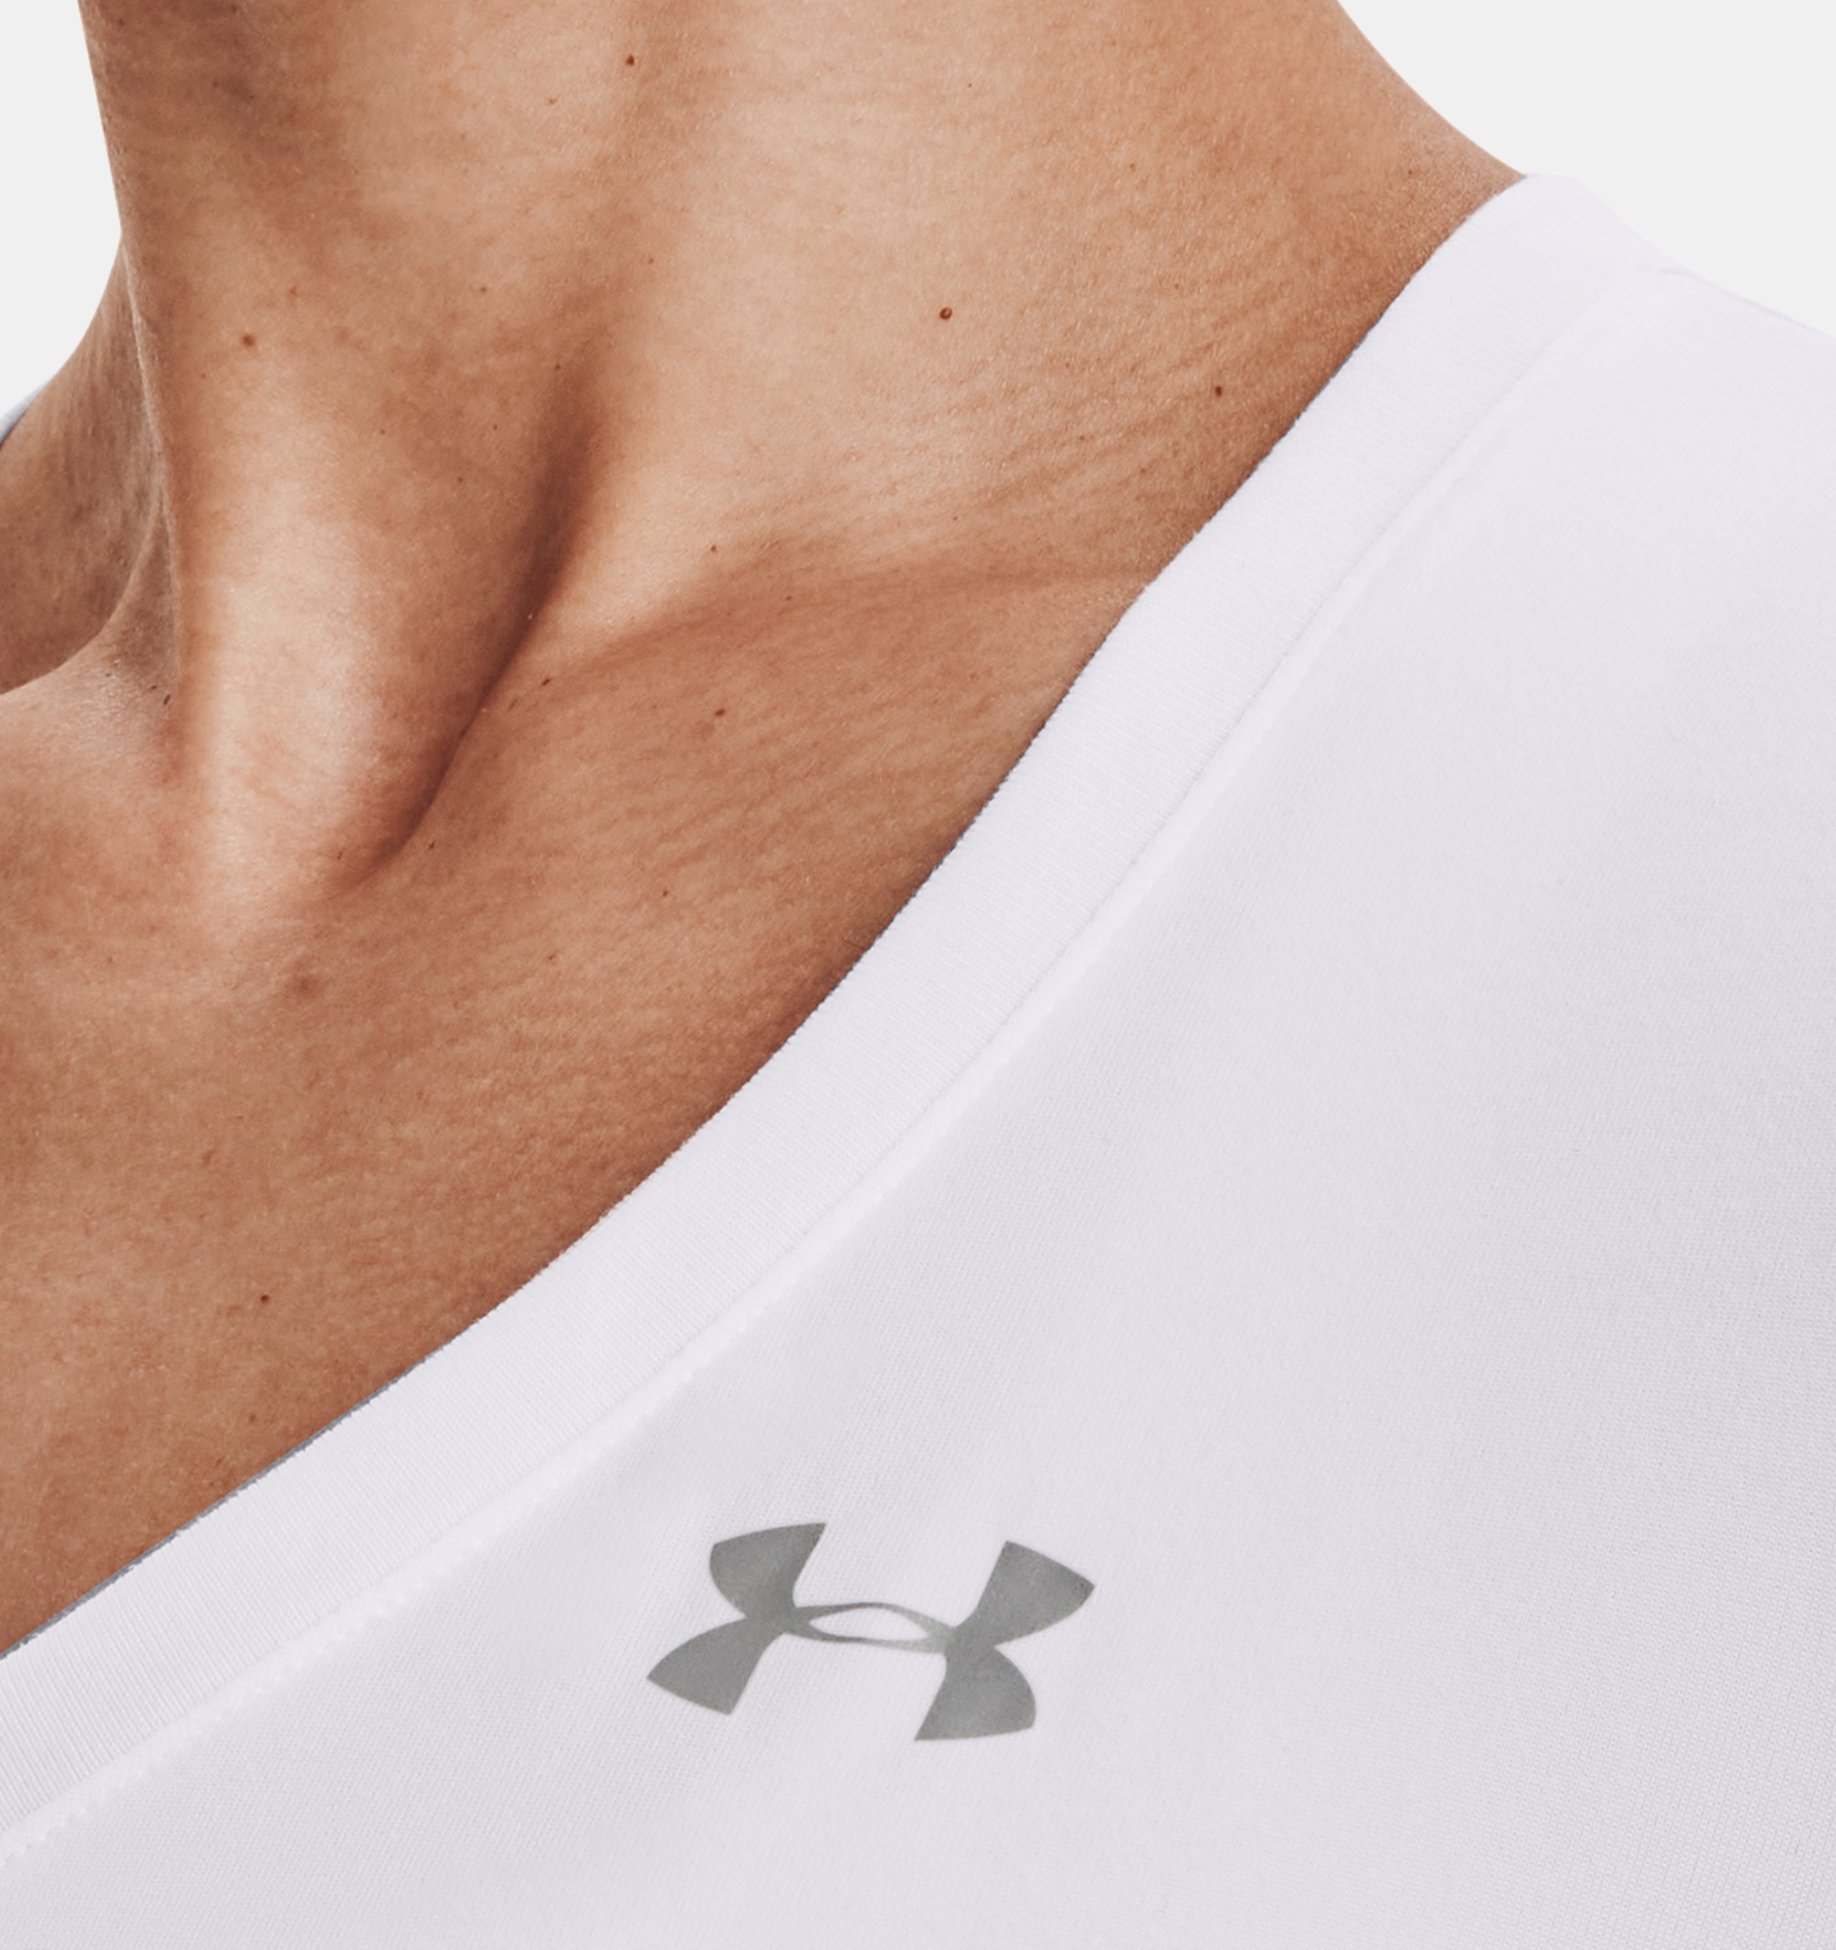 https://underarmour.scene7.com/is/image/Underarmour/V5-1255839-100_COLLAR?rp=standard-0pad|pdpZoomDesktop&scl=0.72&fmt=jpg&qlt=85&resMode=sharp2&cache=on,on&bgc=f0f0f0&wid=1836&hei=1950&size=1500,1500